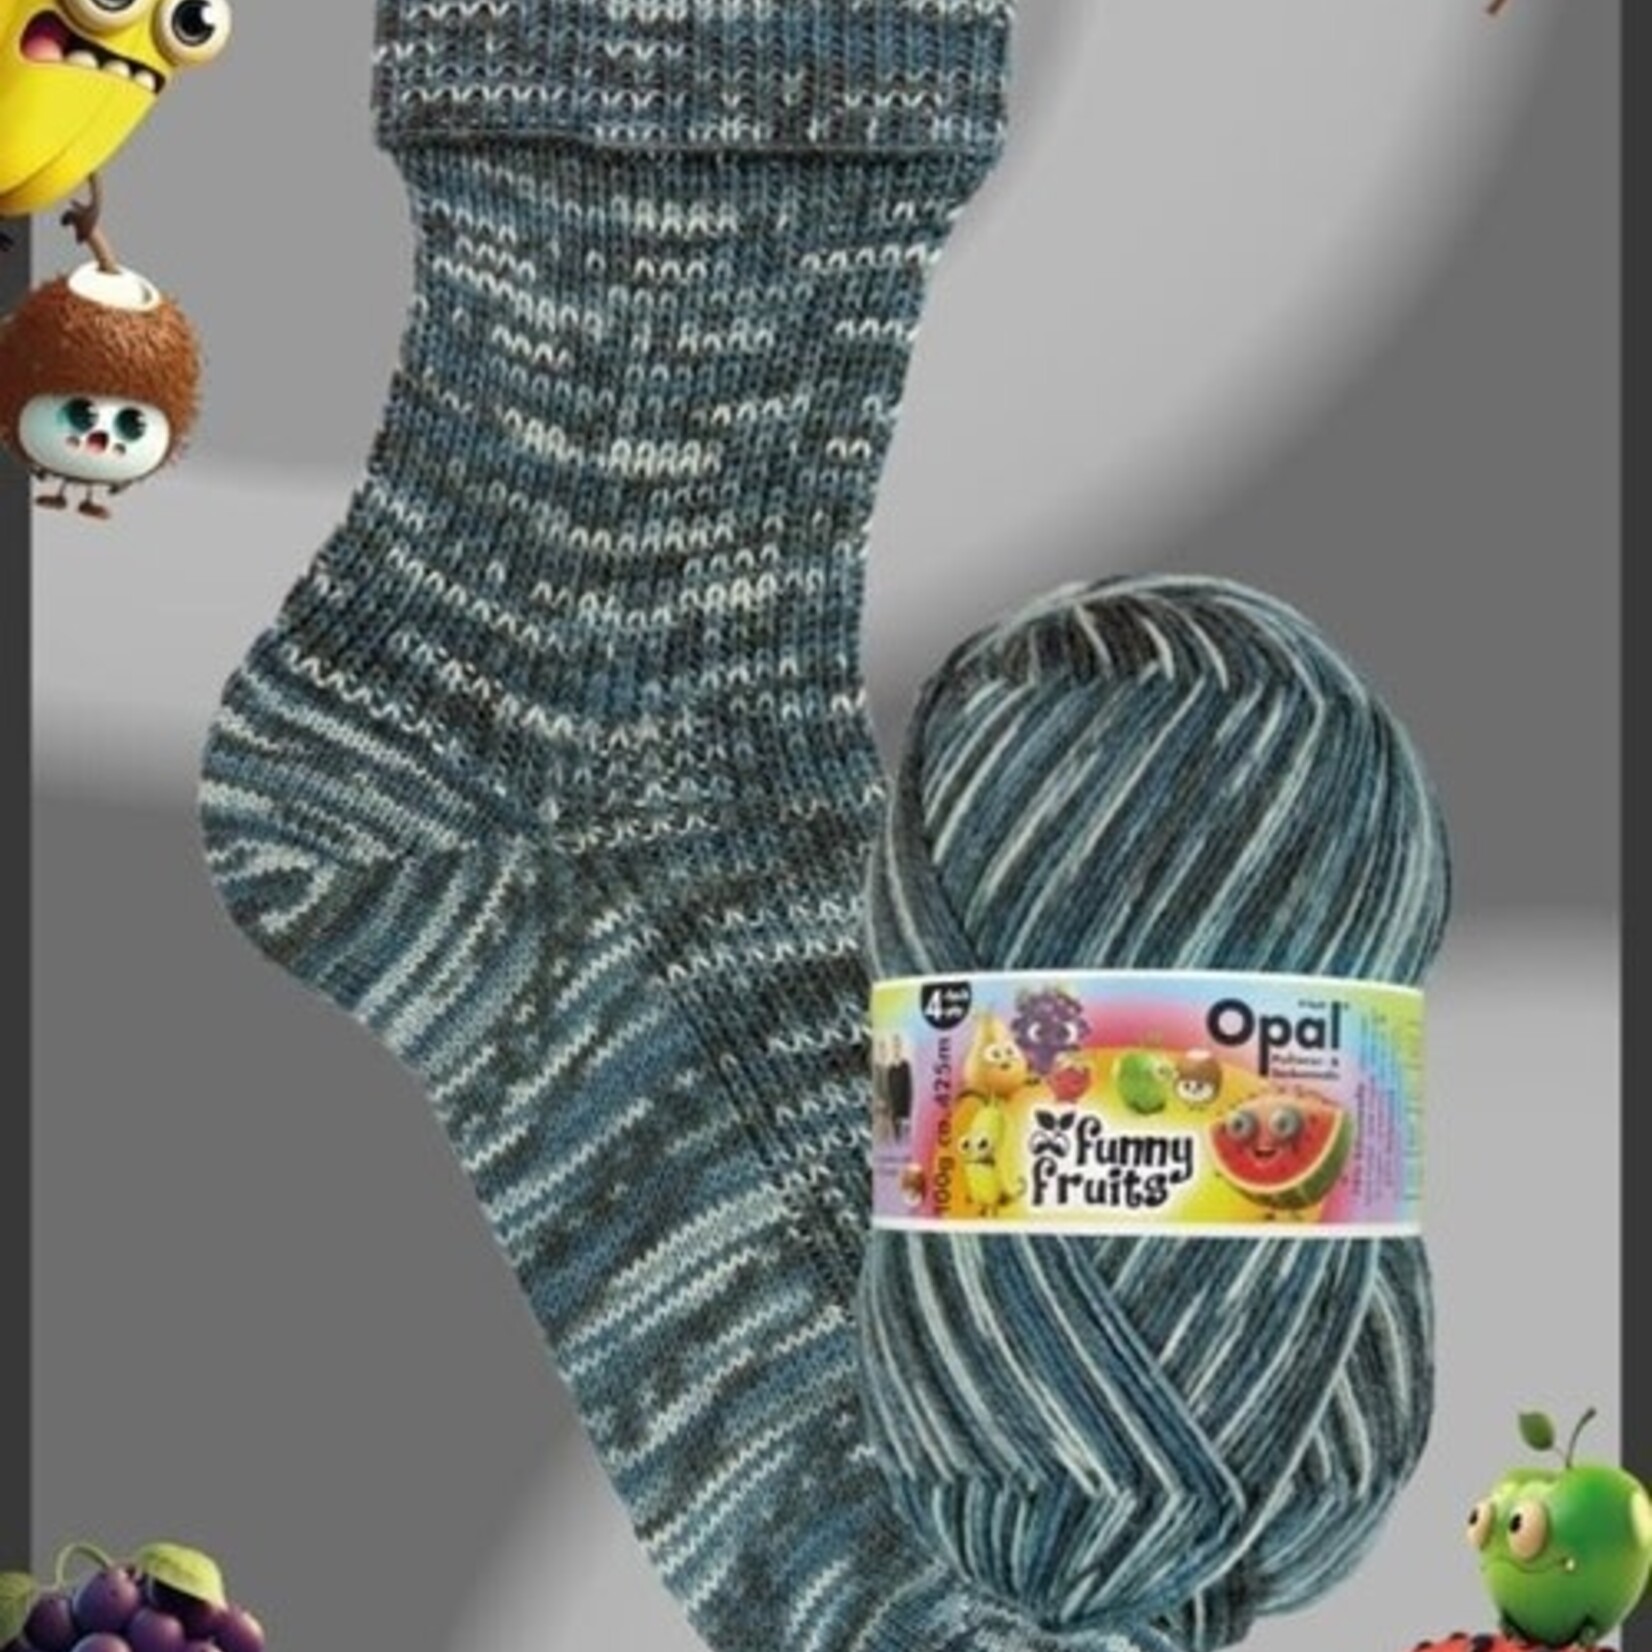 Opal Funny Fruits (4 ply) by Opal